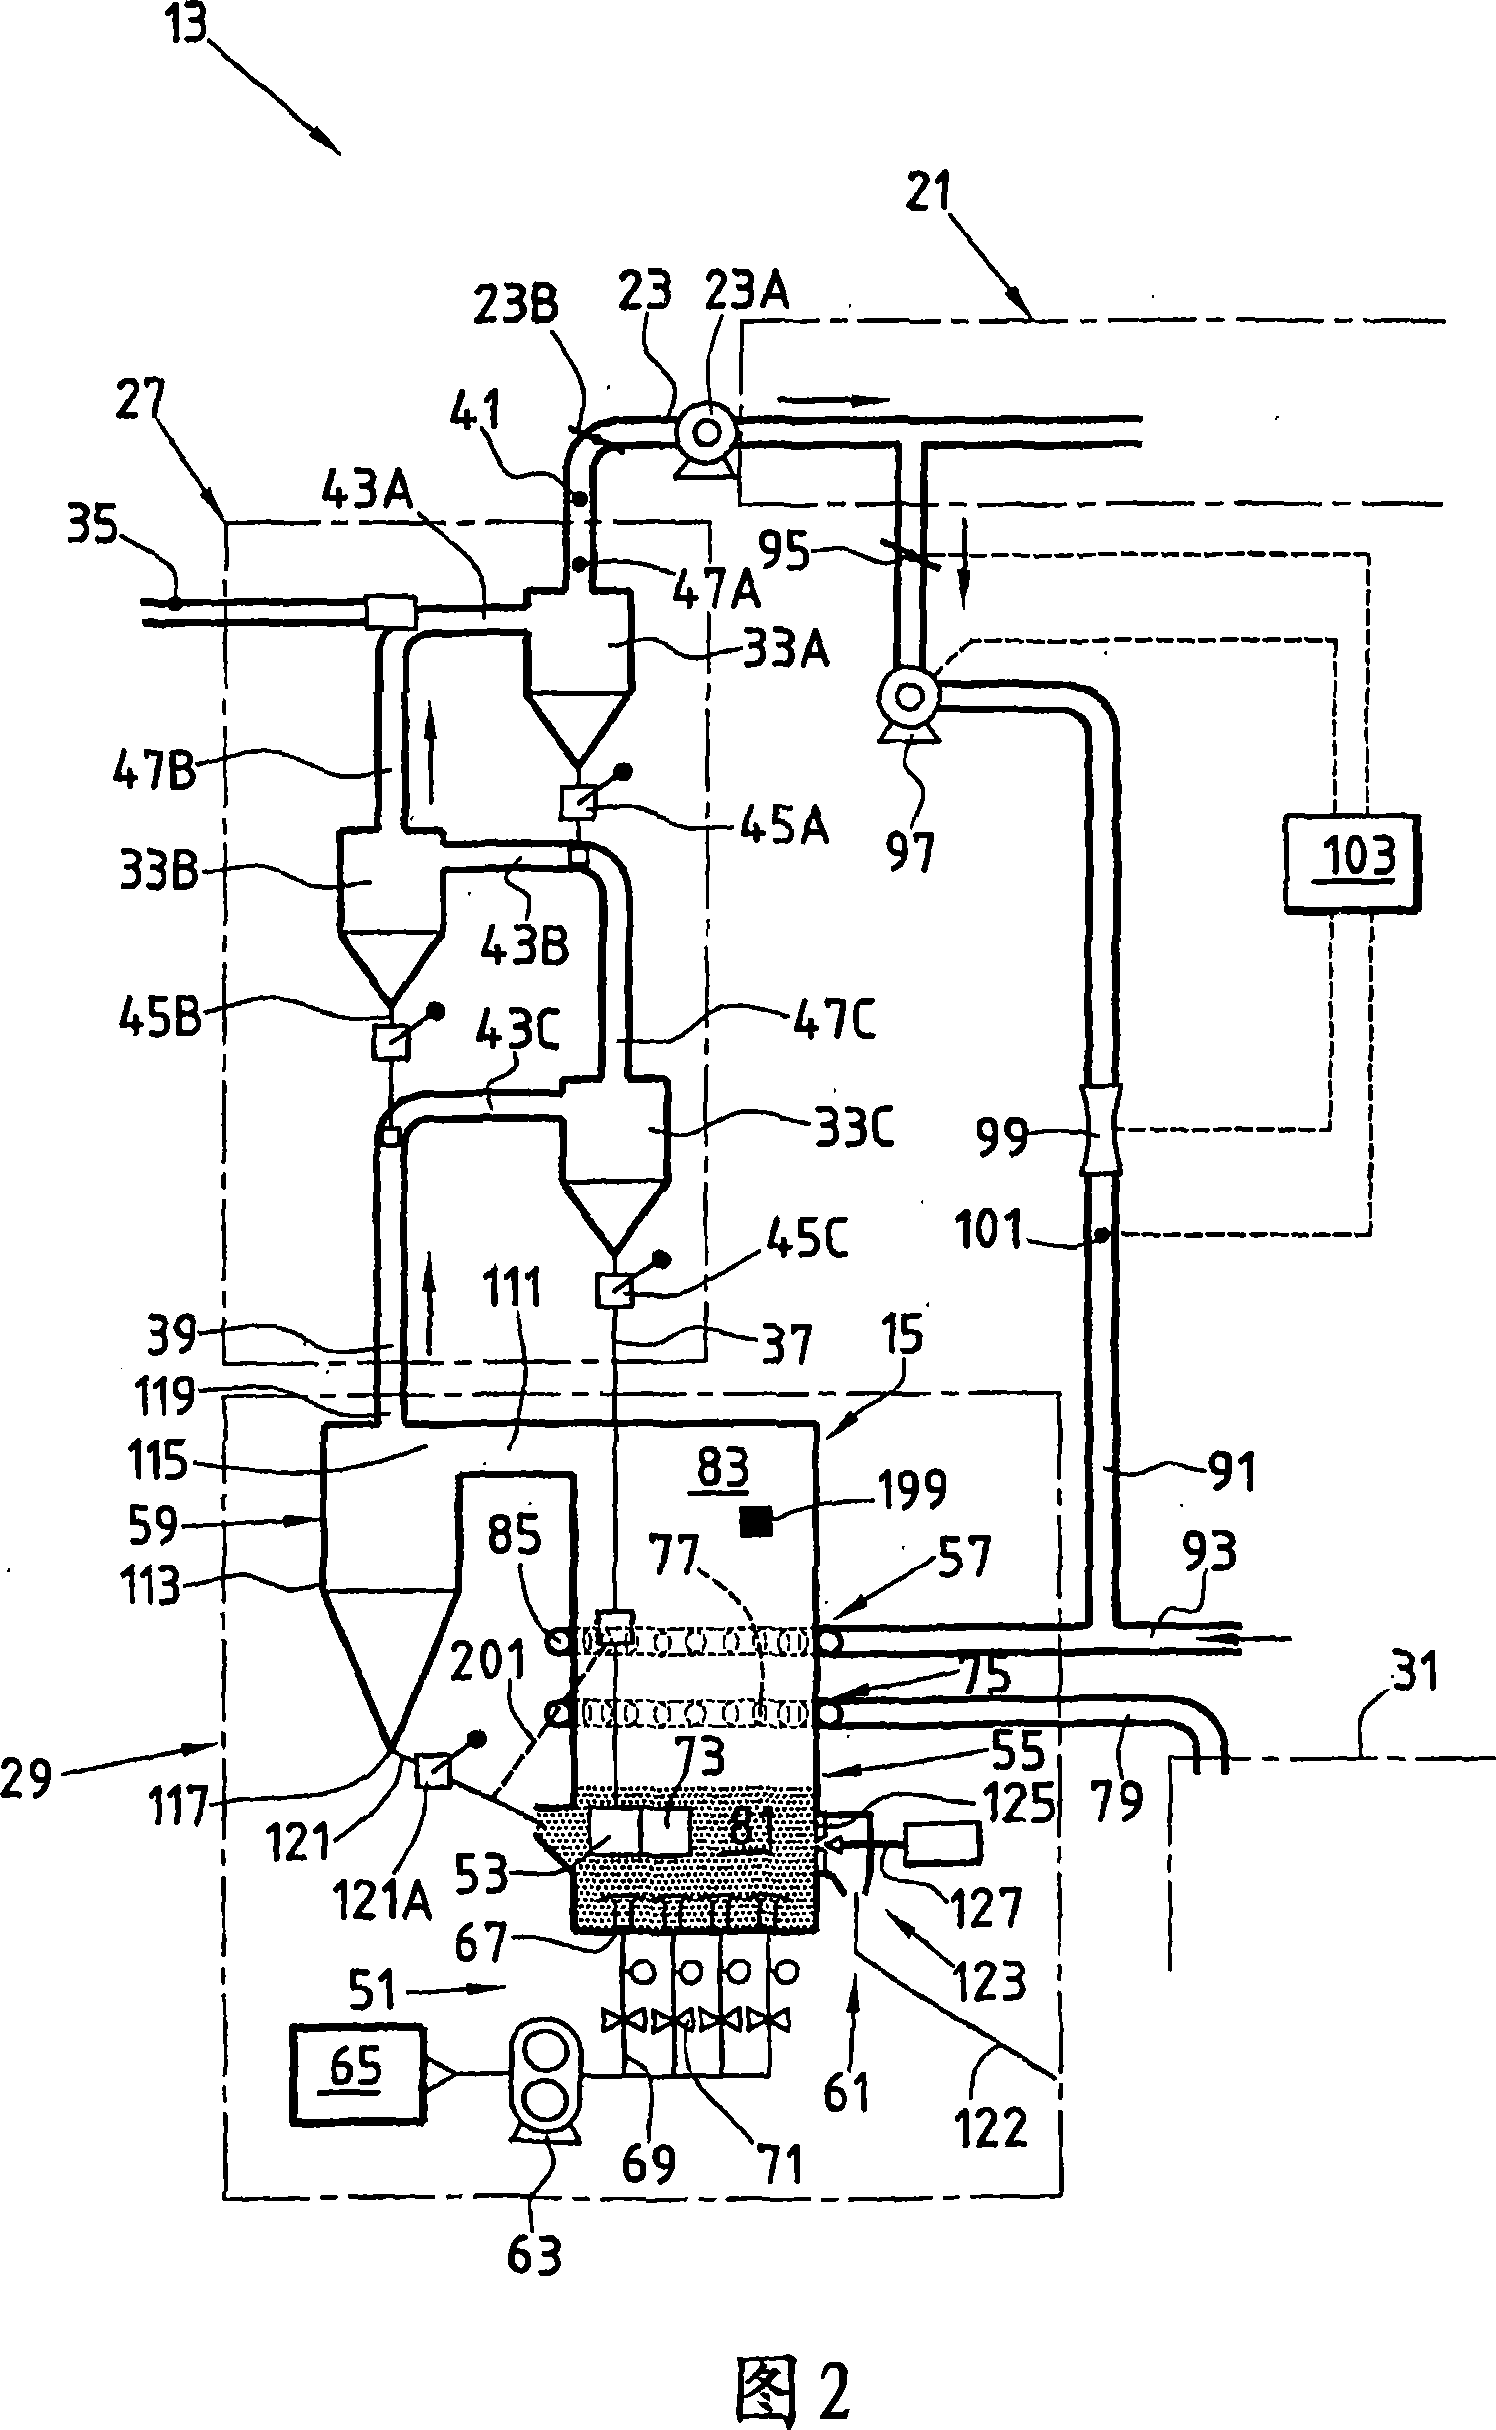 Installation and process for calcining a mineral load containing a carbonate in order to produce a hydraulic binder